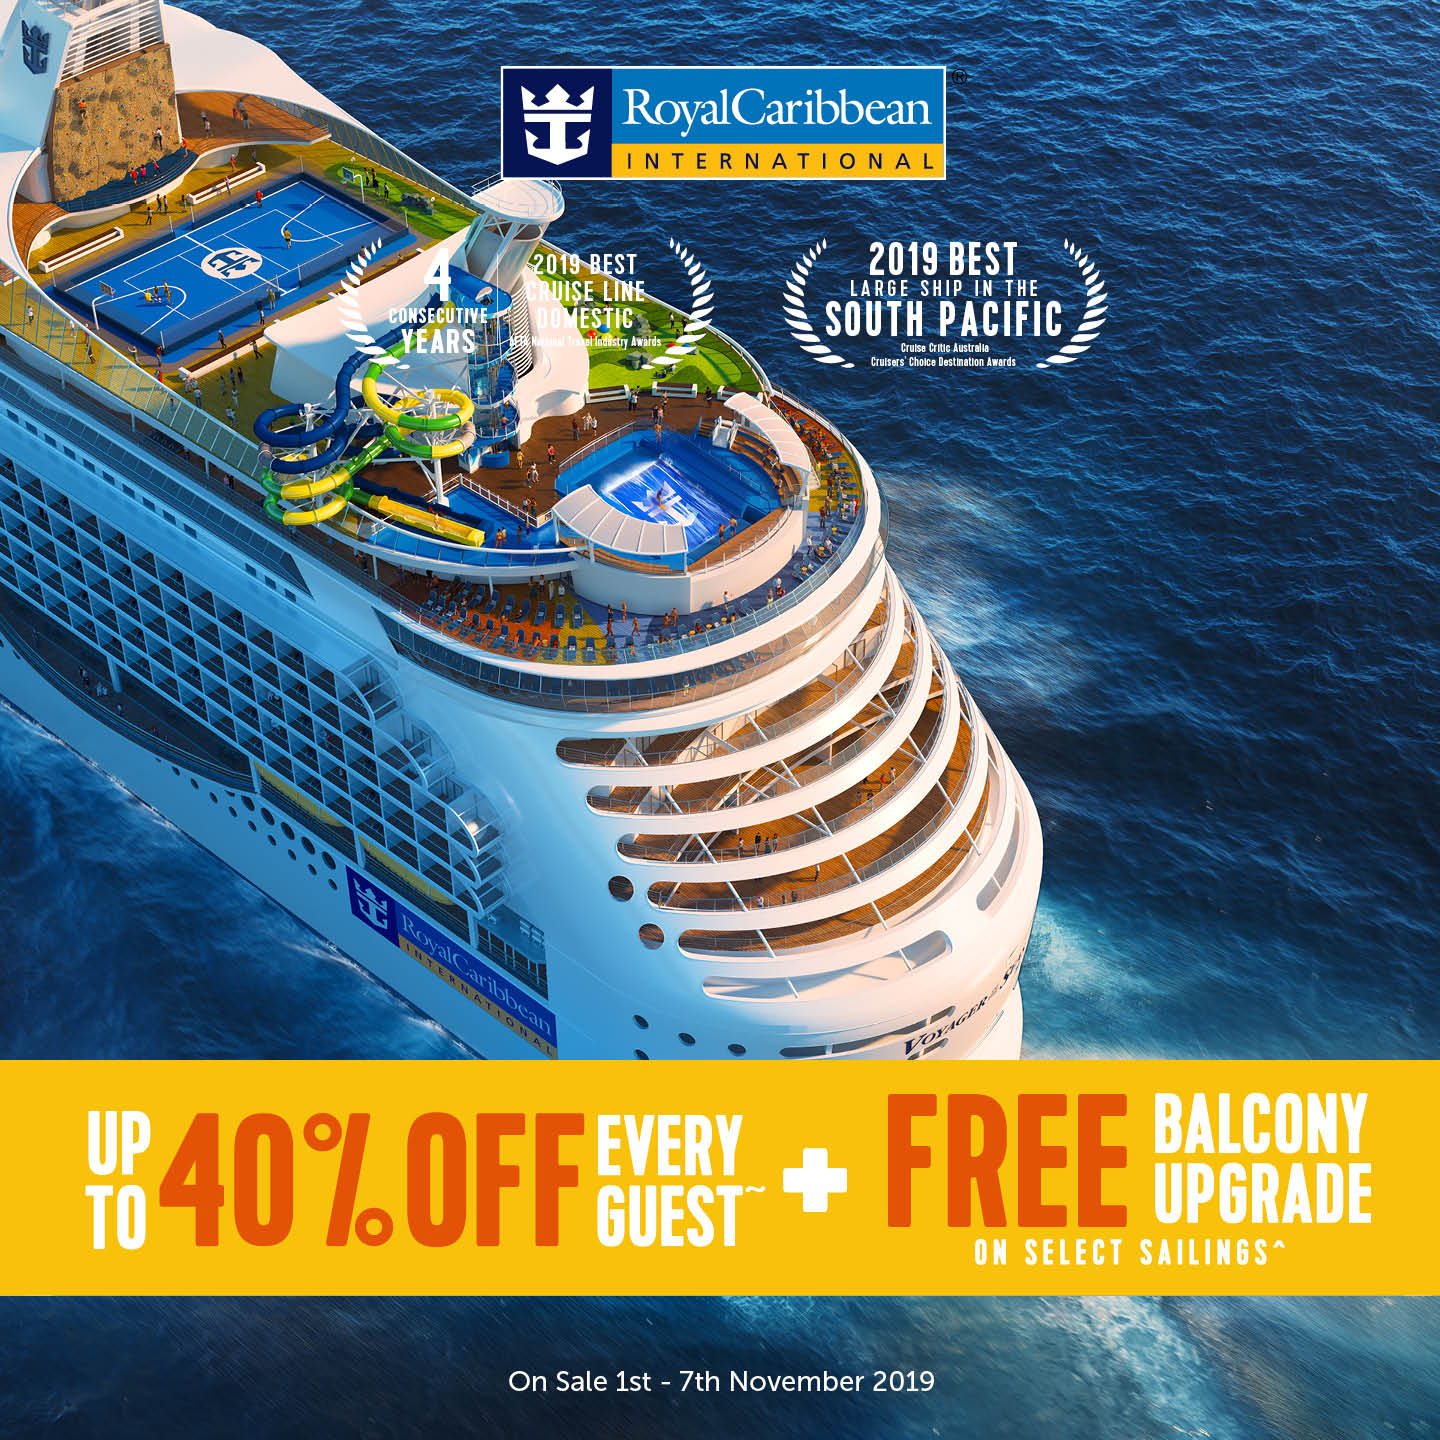 Royal Caribbean Cruise Deals The best cruise bargains on Royal